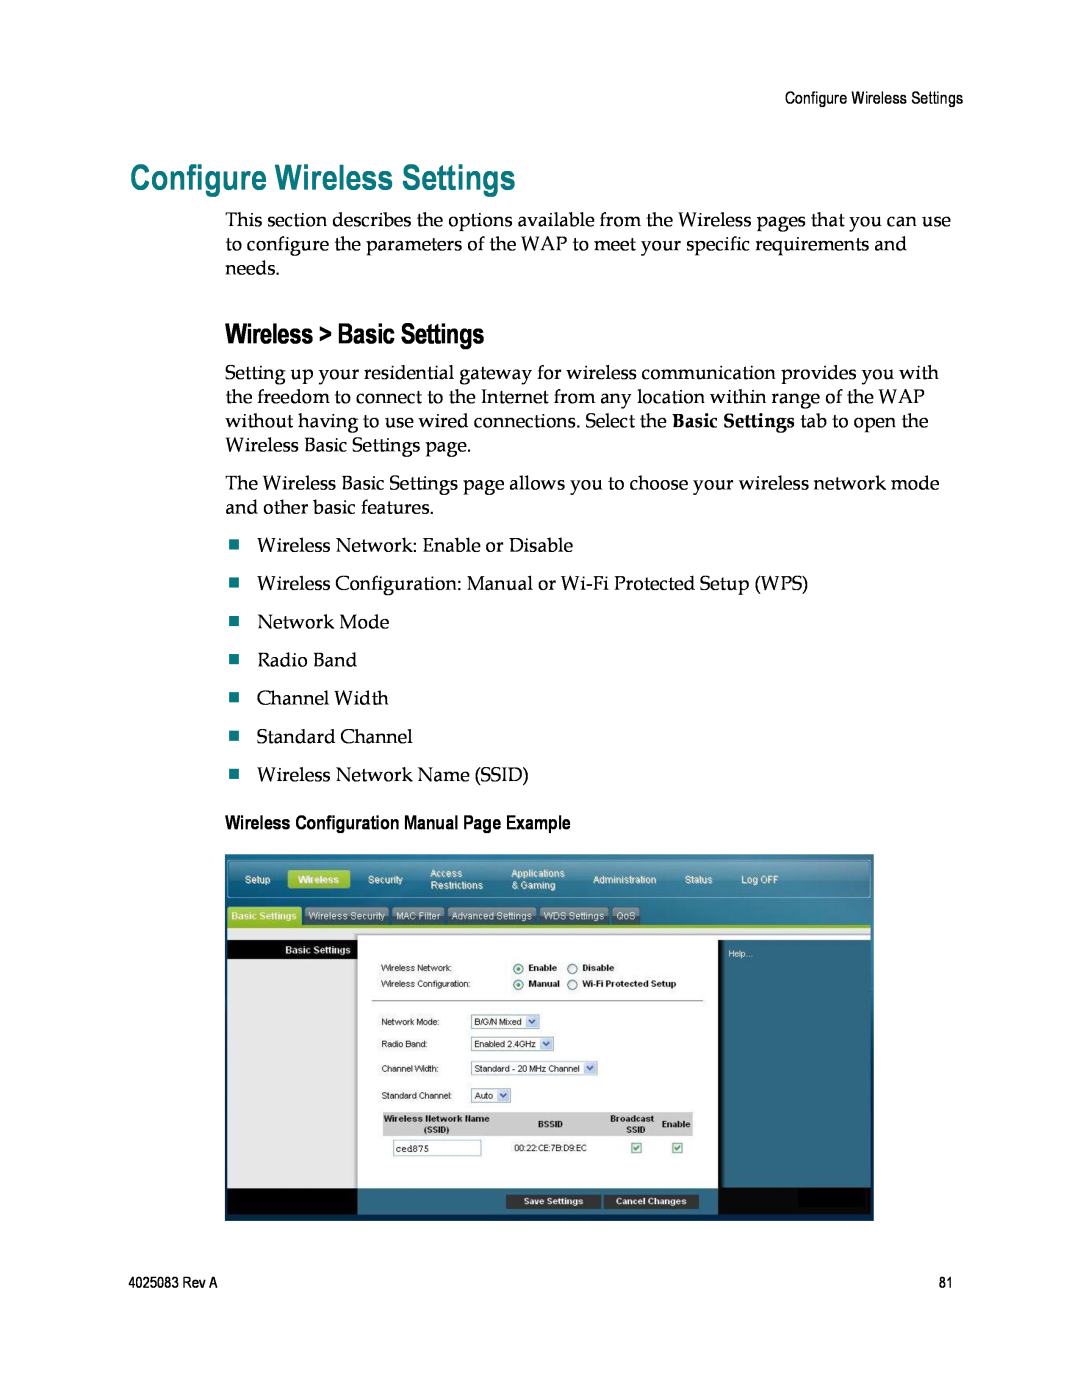 Cisco Systems EPC3827 Configure Wireless Settings, Wireless Basic Settings, Wireless Configuration Manual Page Example 